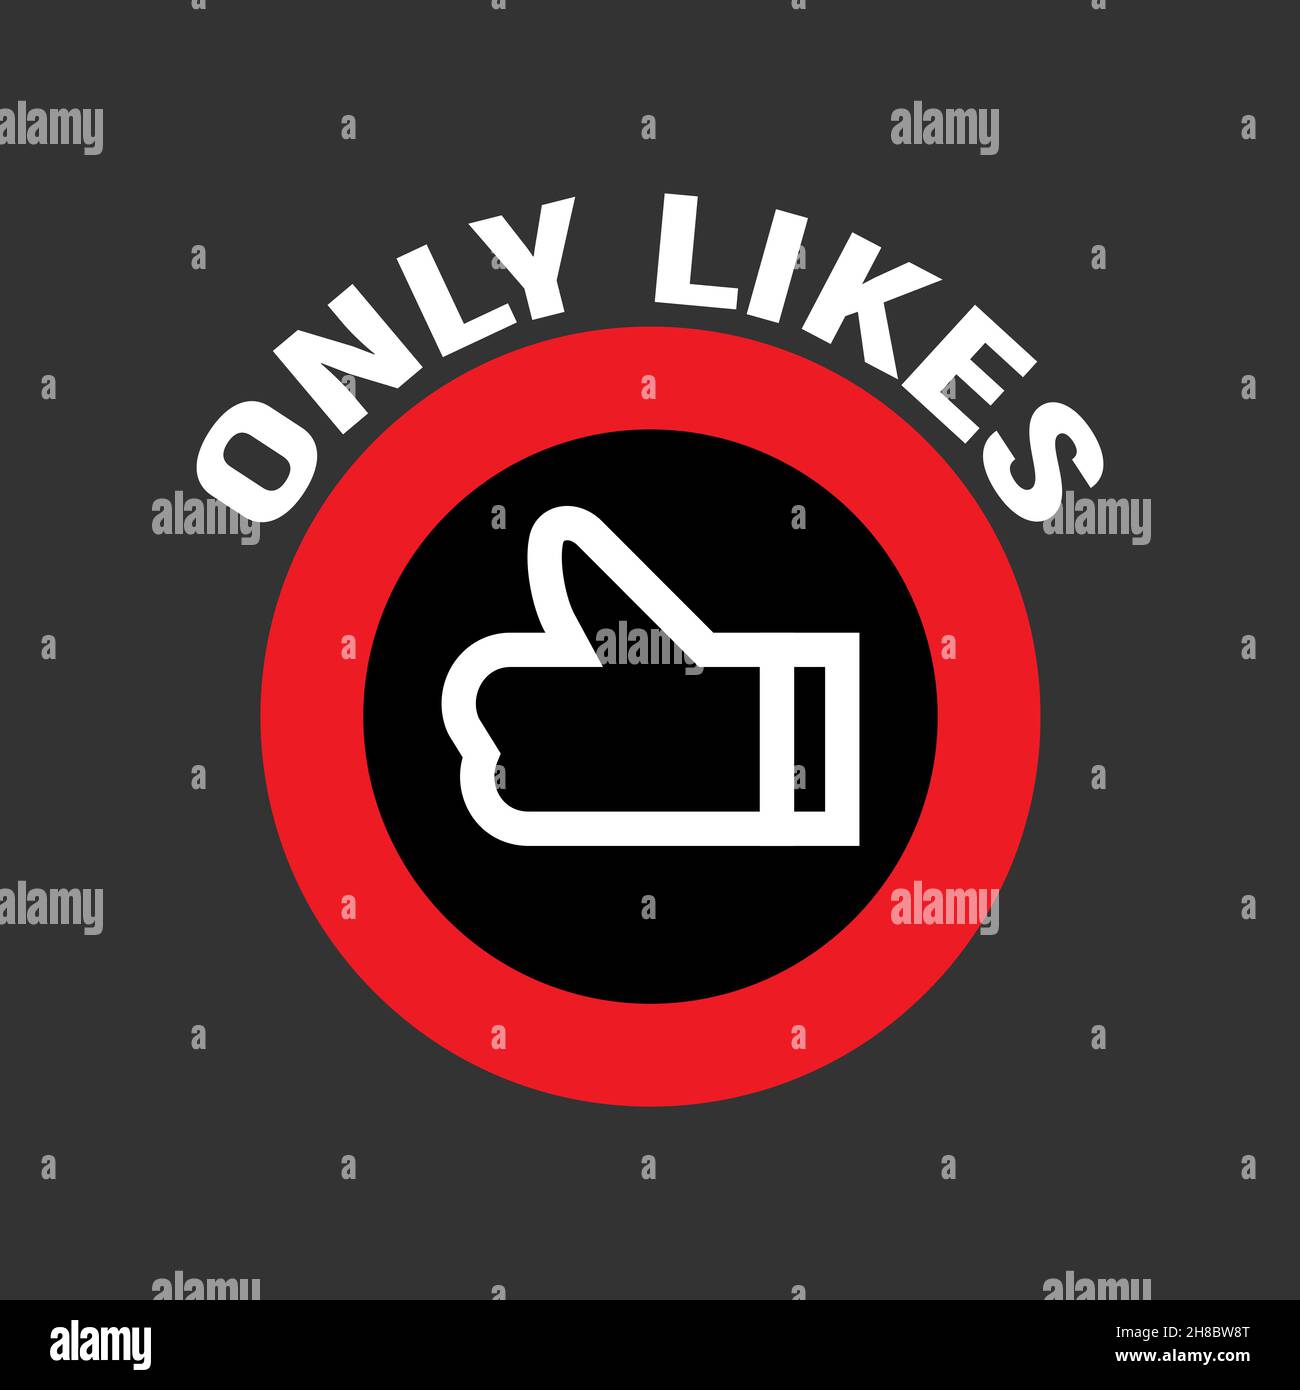 like hand gesture in red circle with slogan, internet communication free of negativity and bullying. Stock Vector